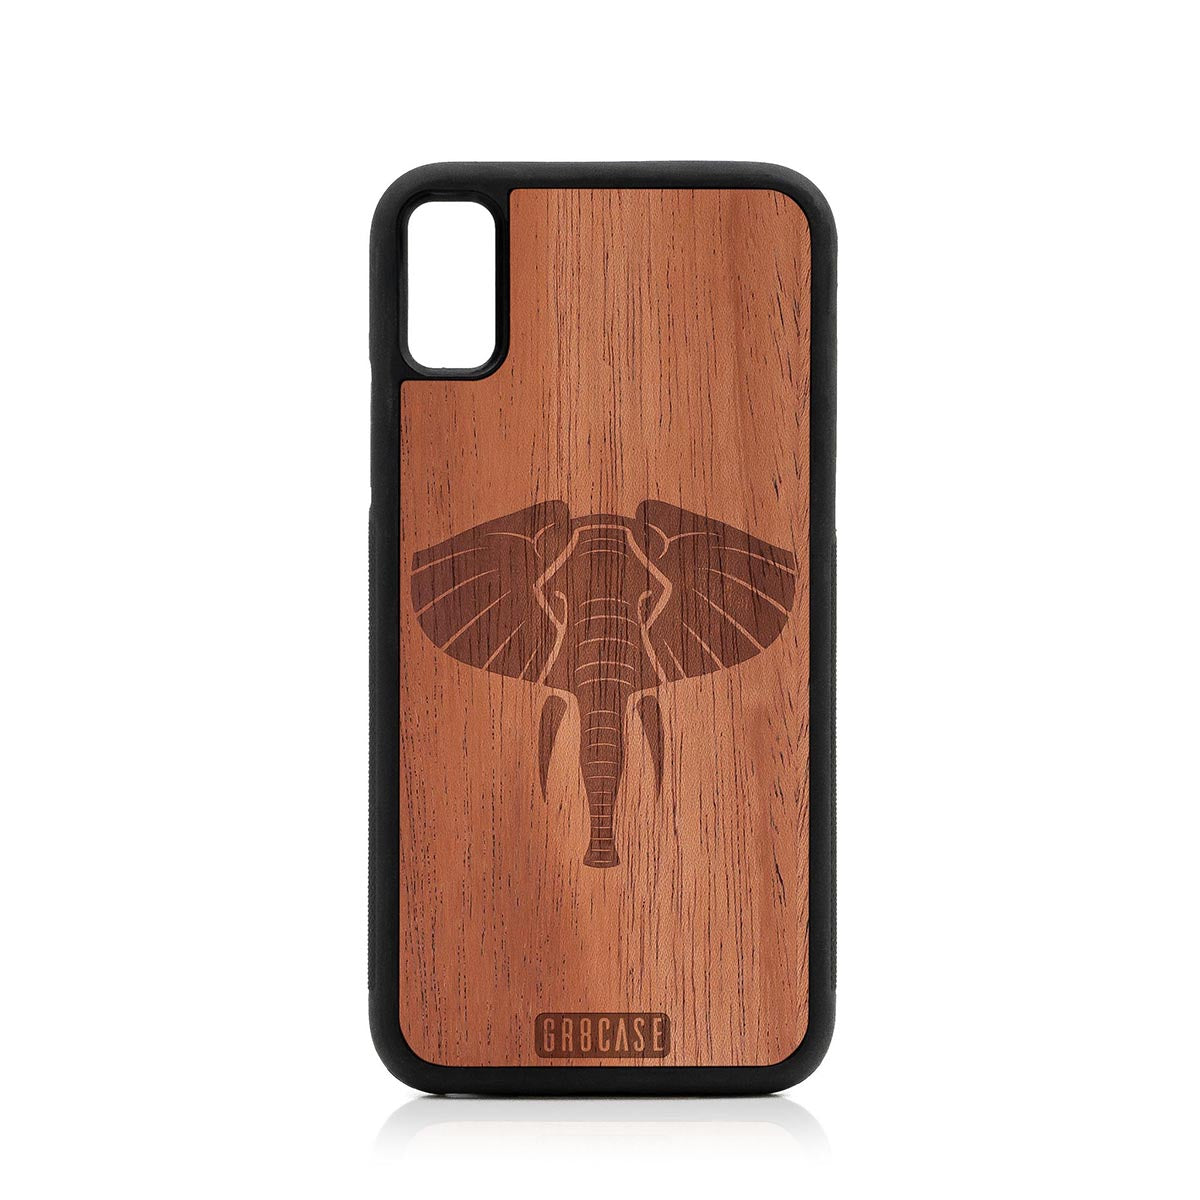 Elephant Design Wood Case For iPhone XR by GR8CASE